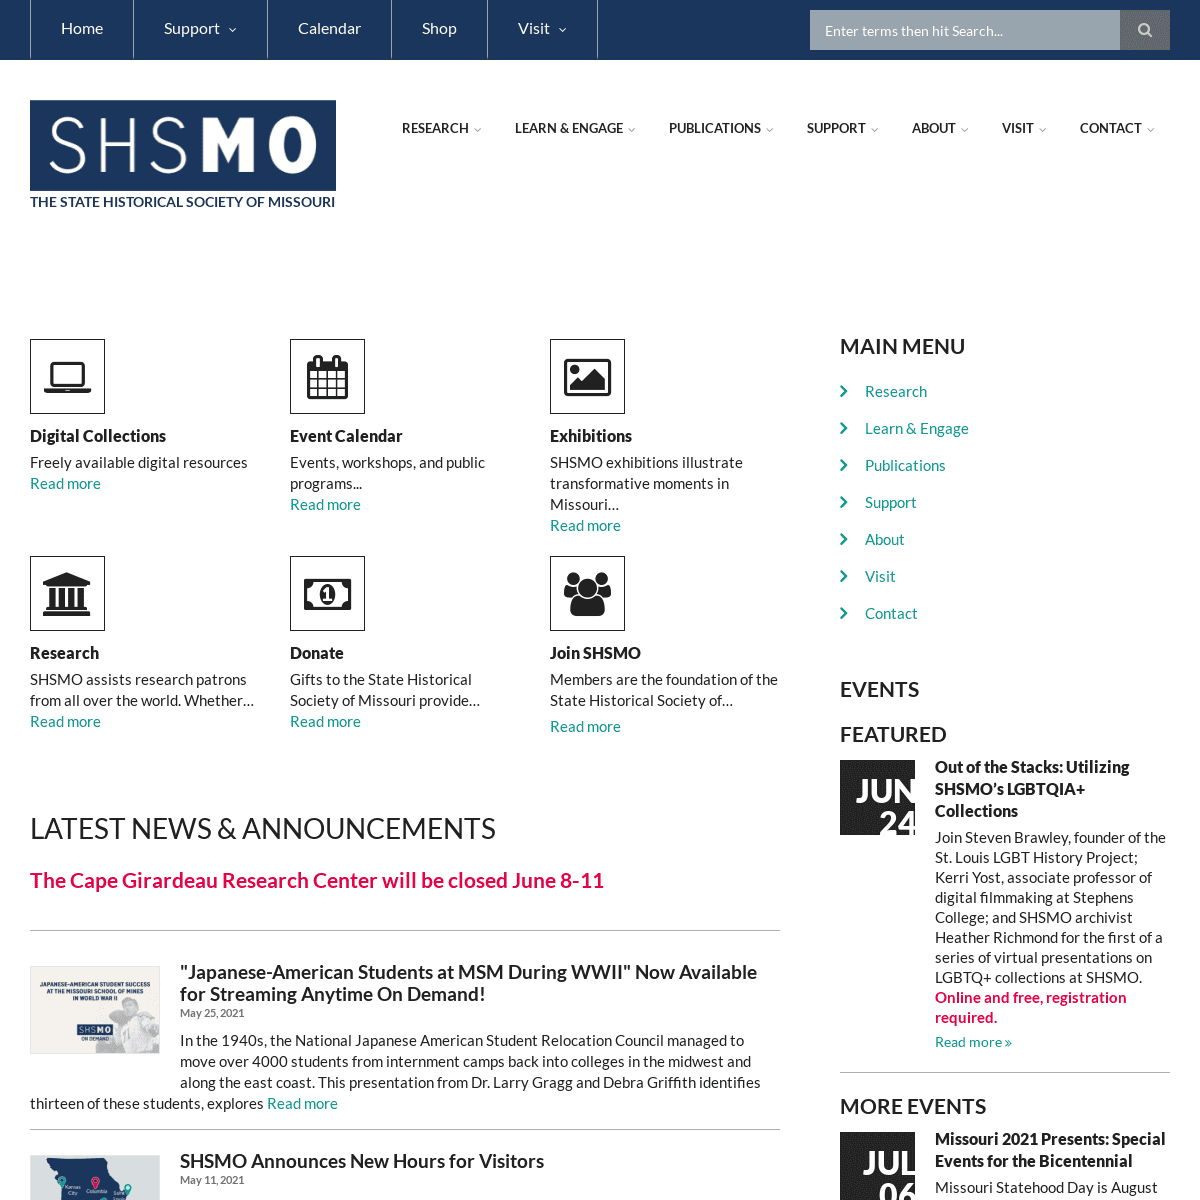 A complete backup of https://shsmo.org